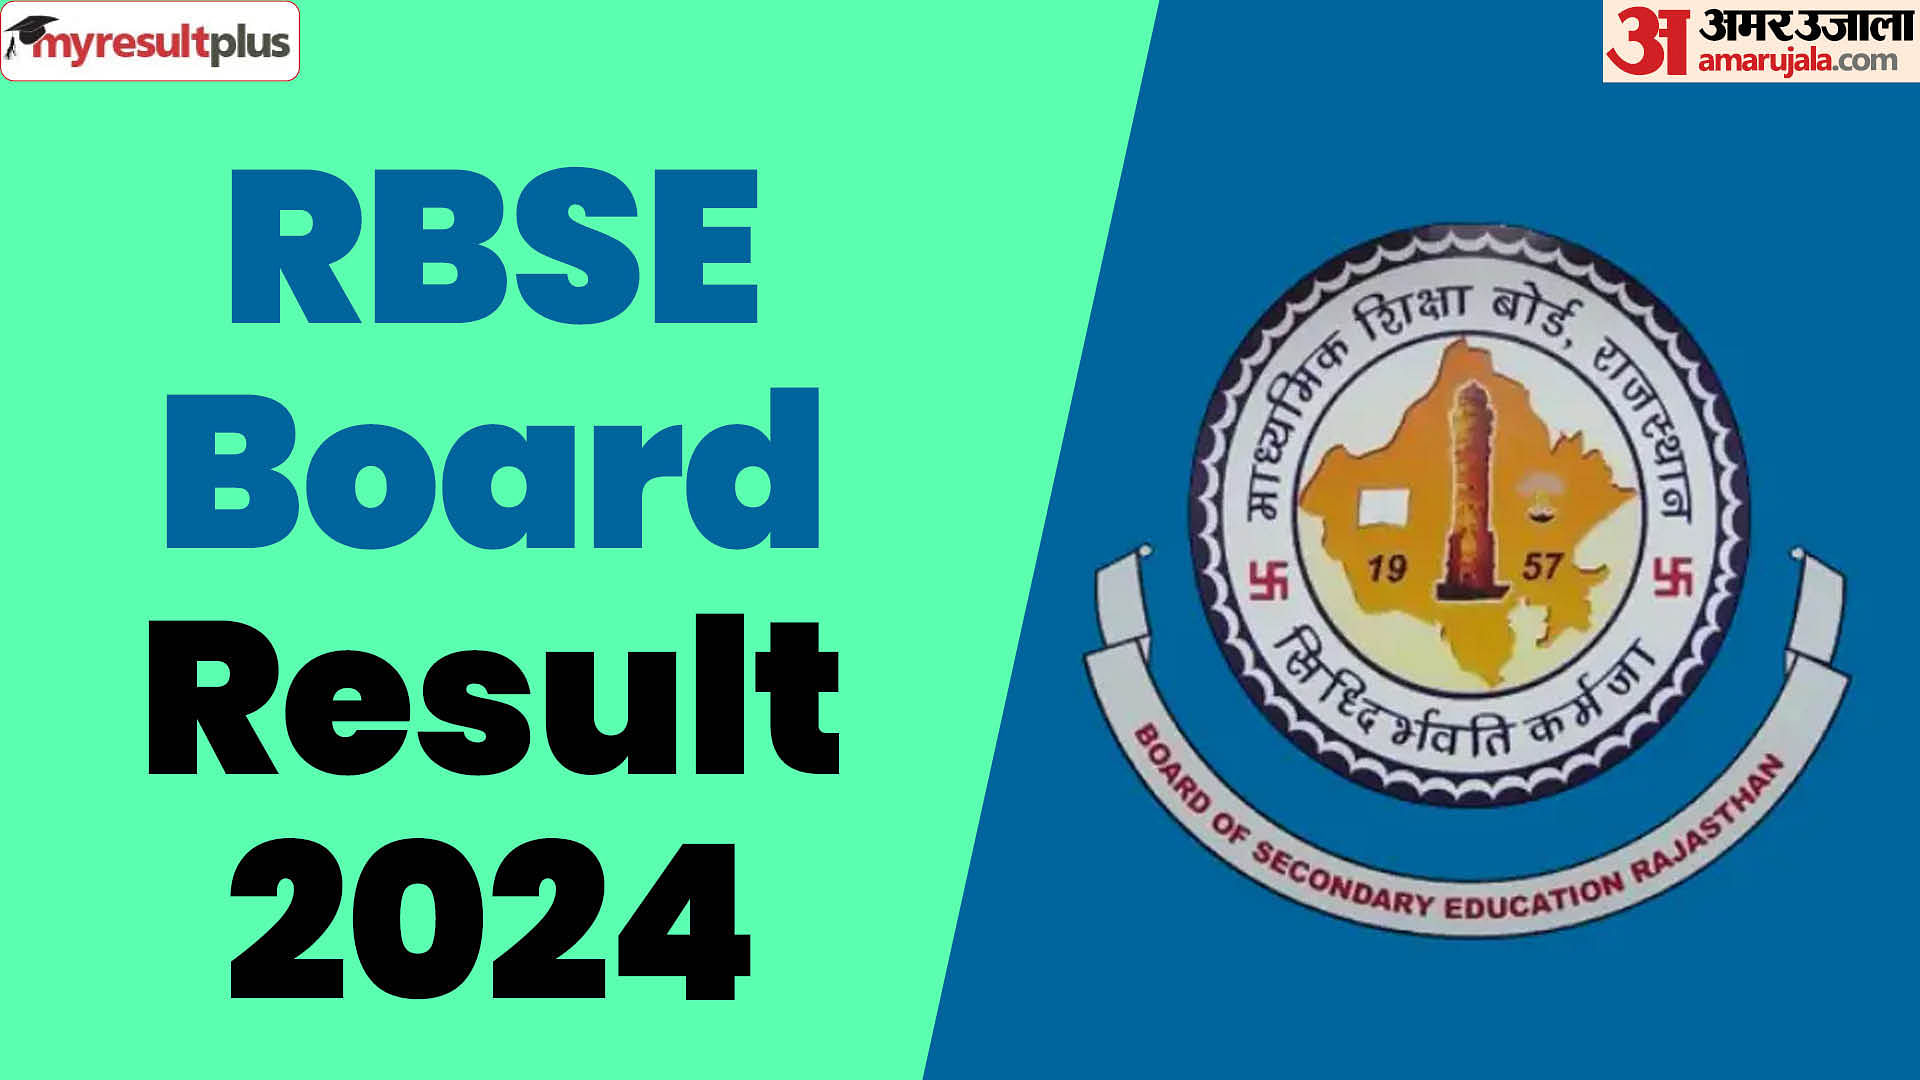 RBSE 10th, 12th Result 2024 soon: Check how to download and previous year result dates here